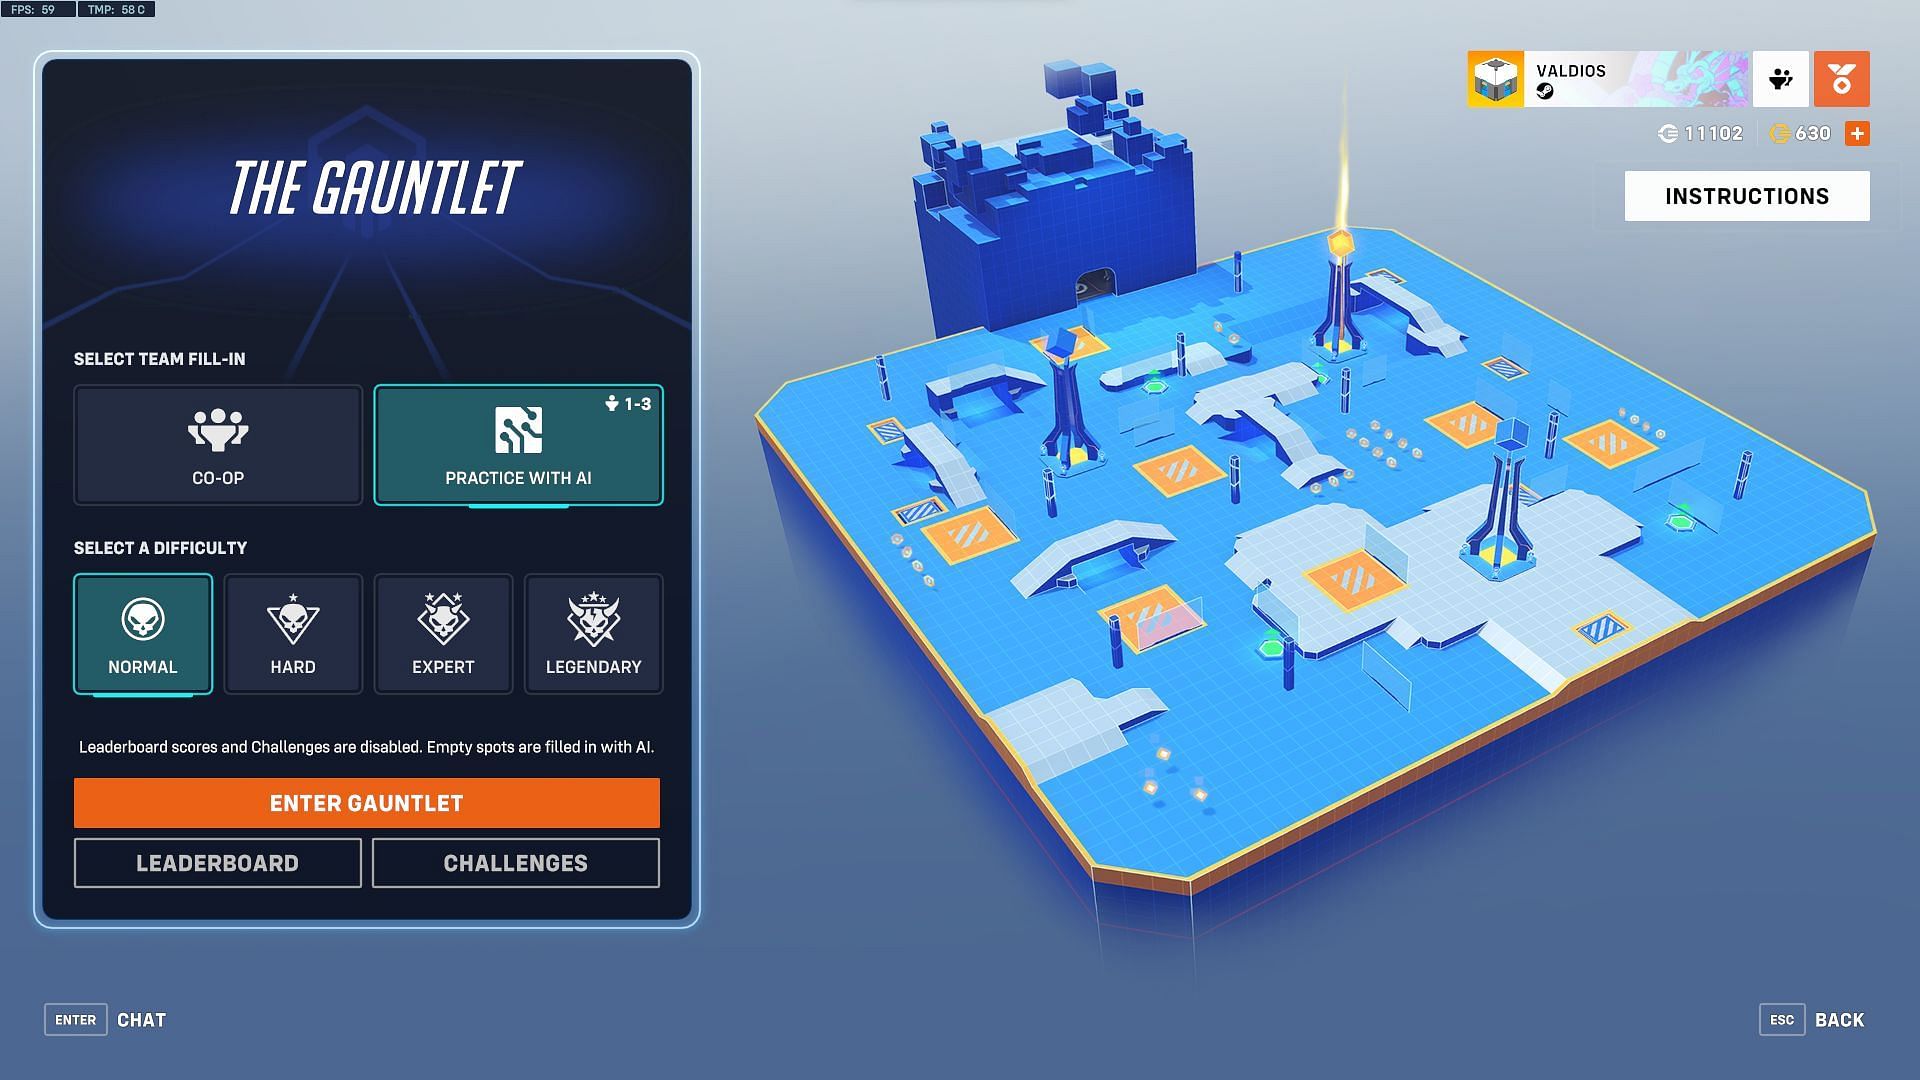 Layout of the map in Gauntlet mode, showing the towers (Image via Blizzard Entertainment)